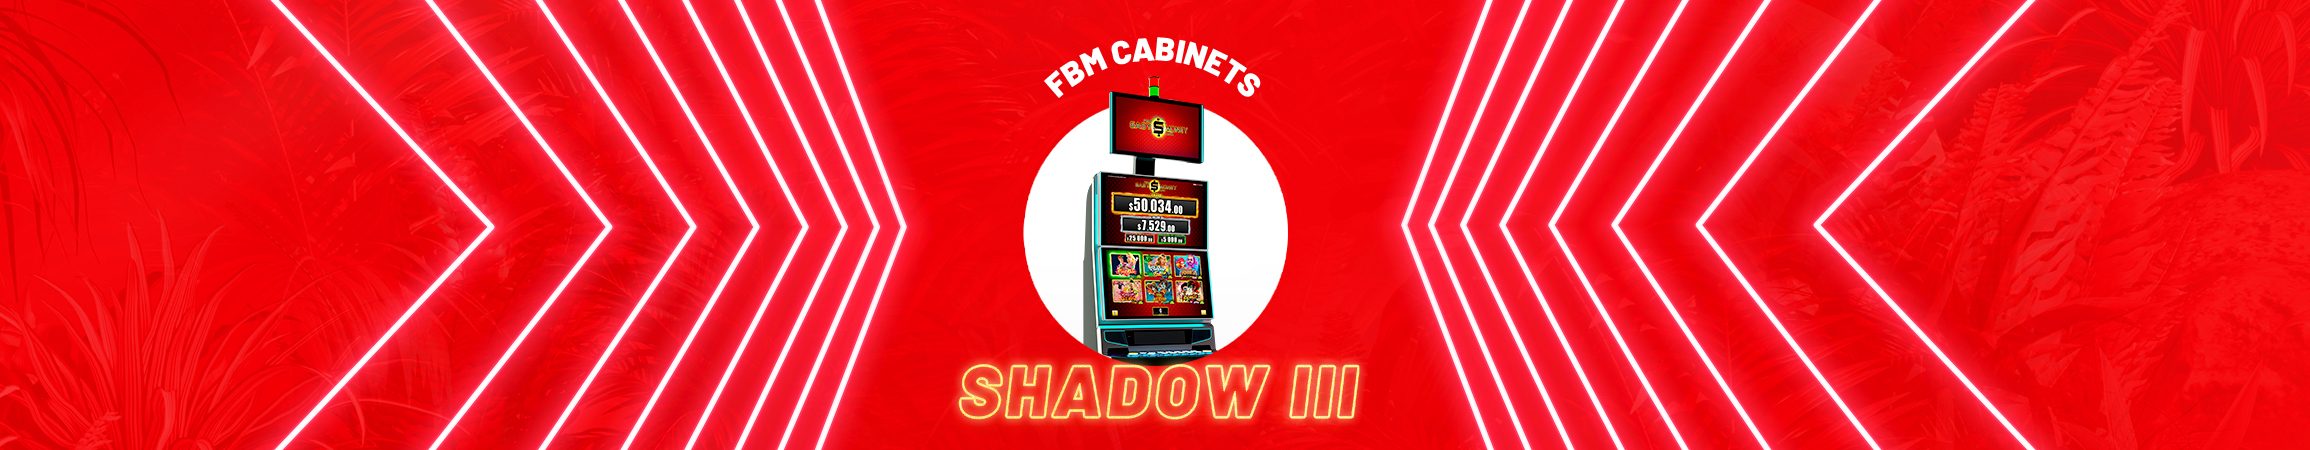 FBM®️ Shadow III: how top-notch casino cabinet hardware can be more profitable